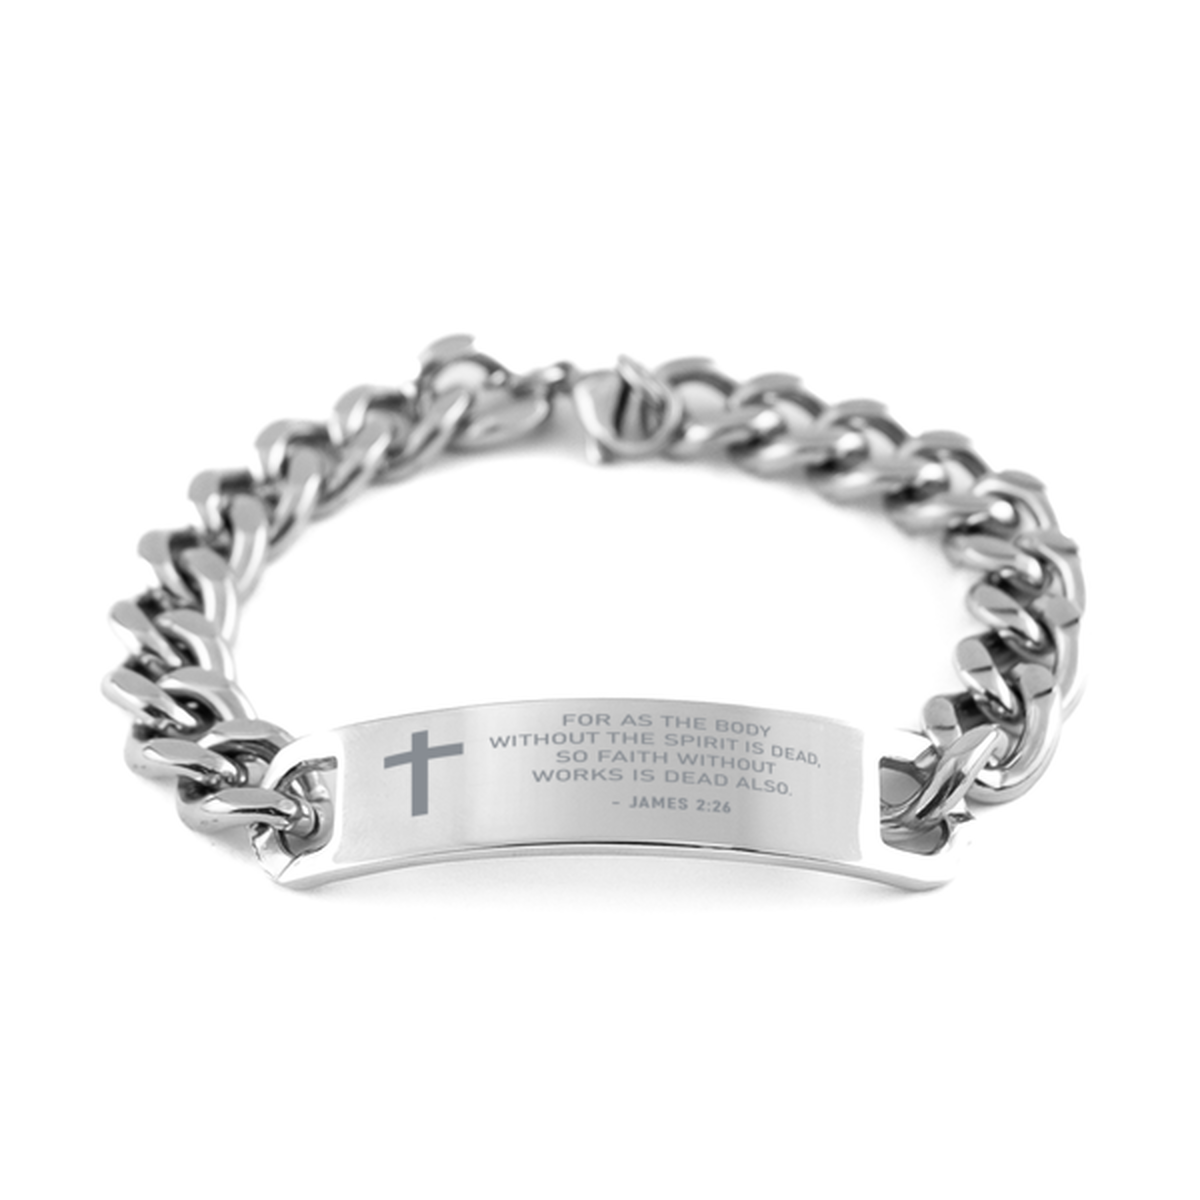 Bible Verse Chain Stainless Steel Bracelet, James 2:26 For As The Body Without The Spirit Is Dead, So, Inspirational Christian Gifts For Men Women